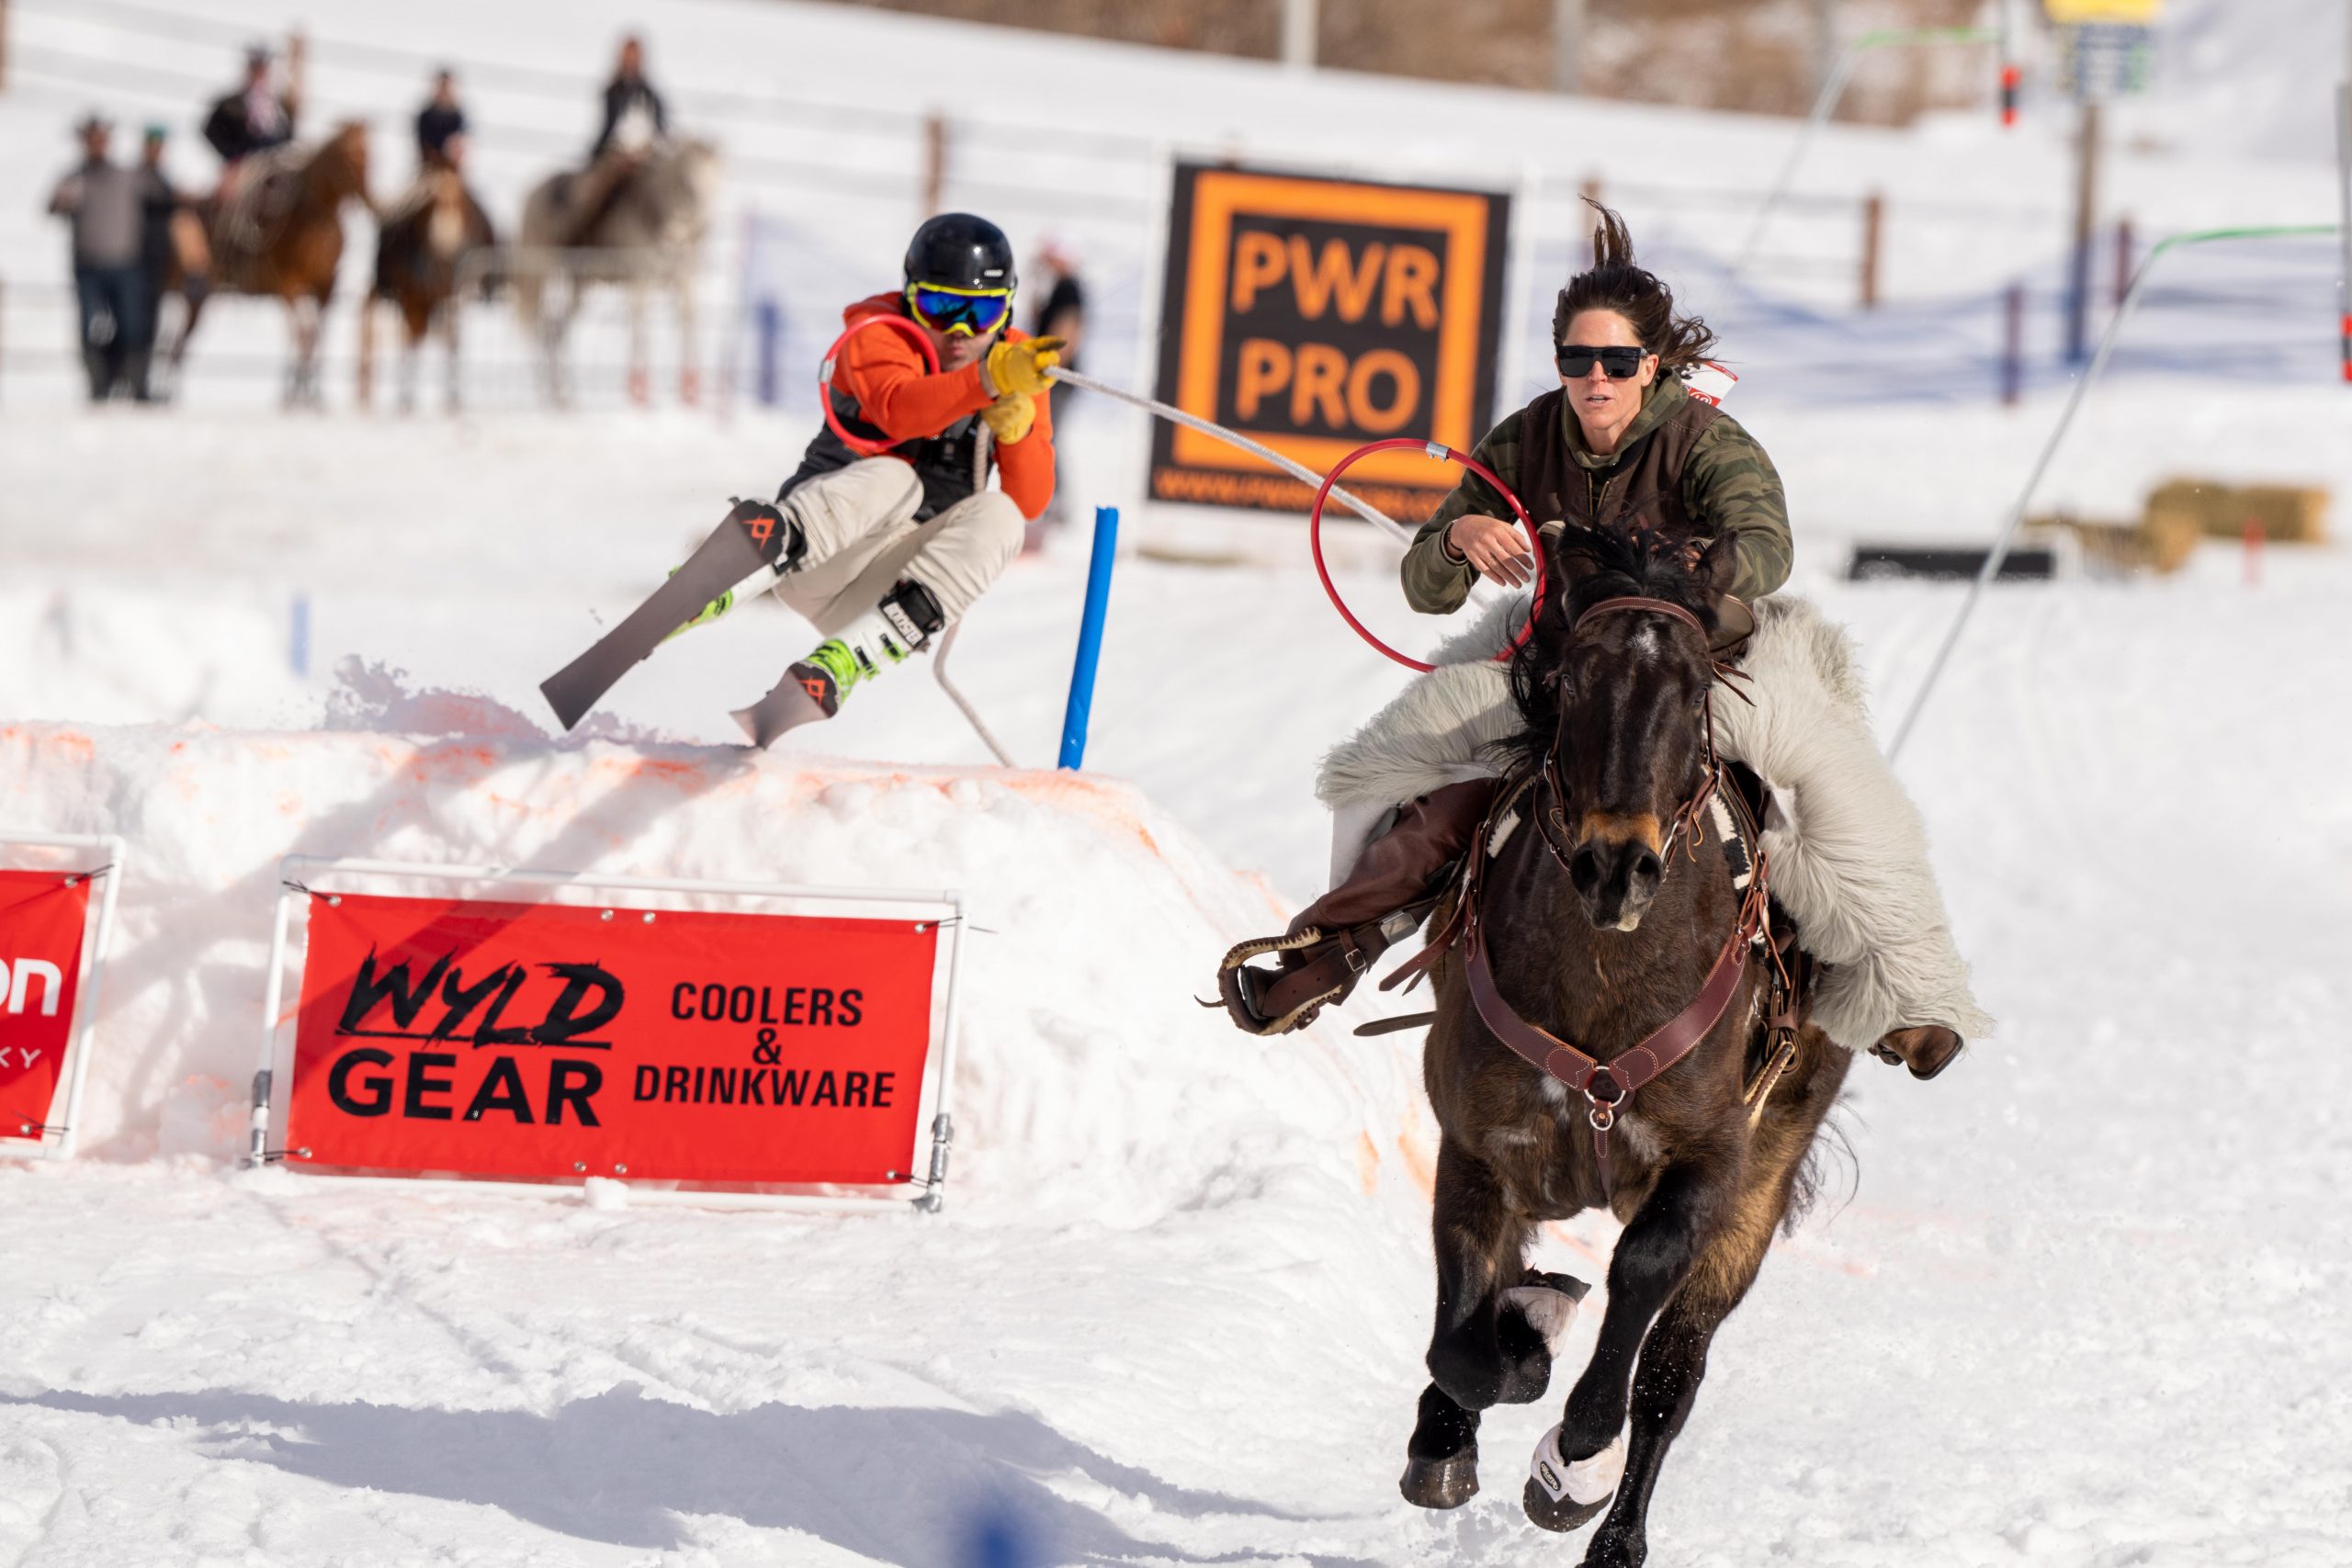 In the five years Utah has had its own Skijoring competitions, the sport has grown in popularity for spectators and competitors.